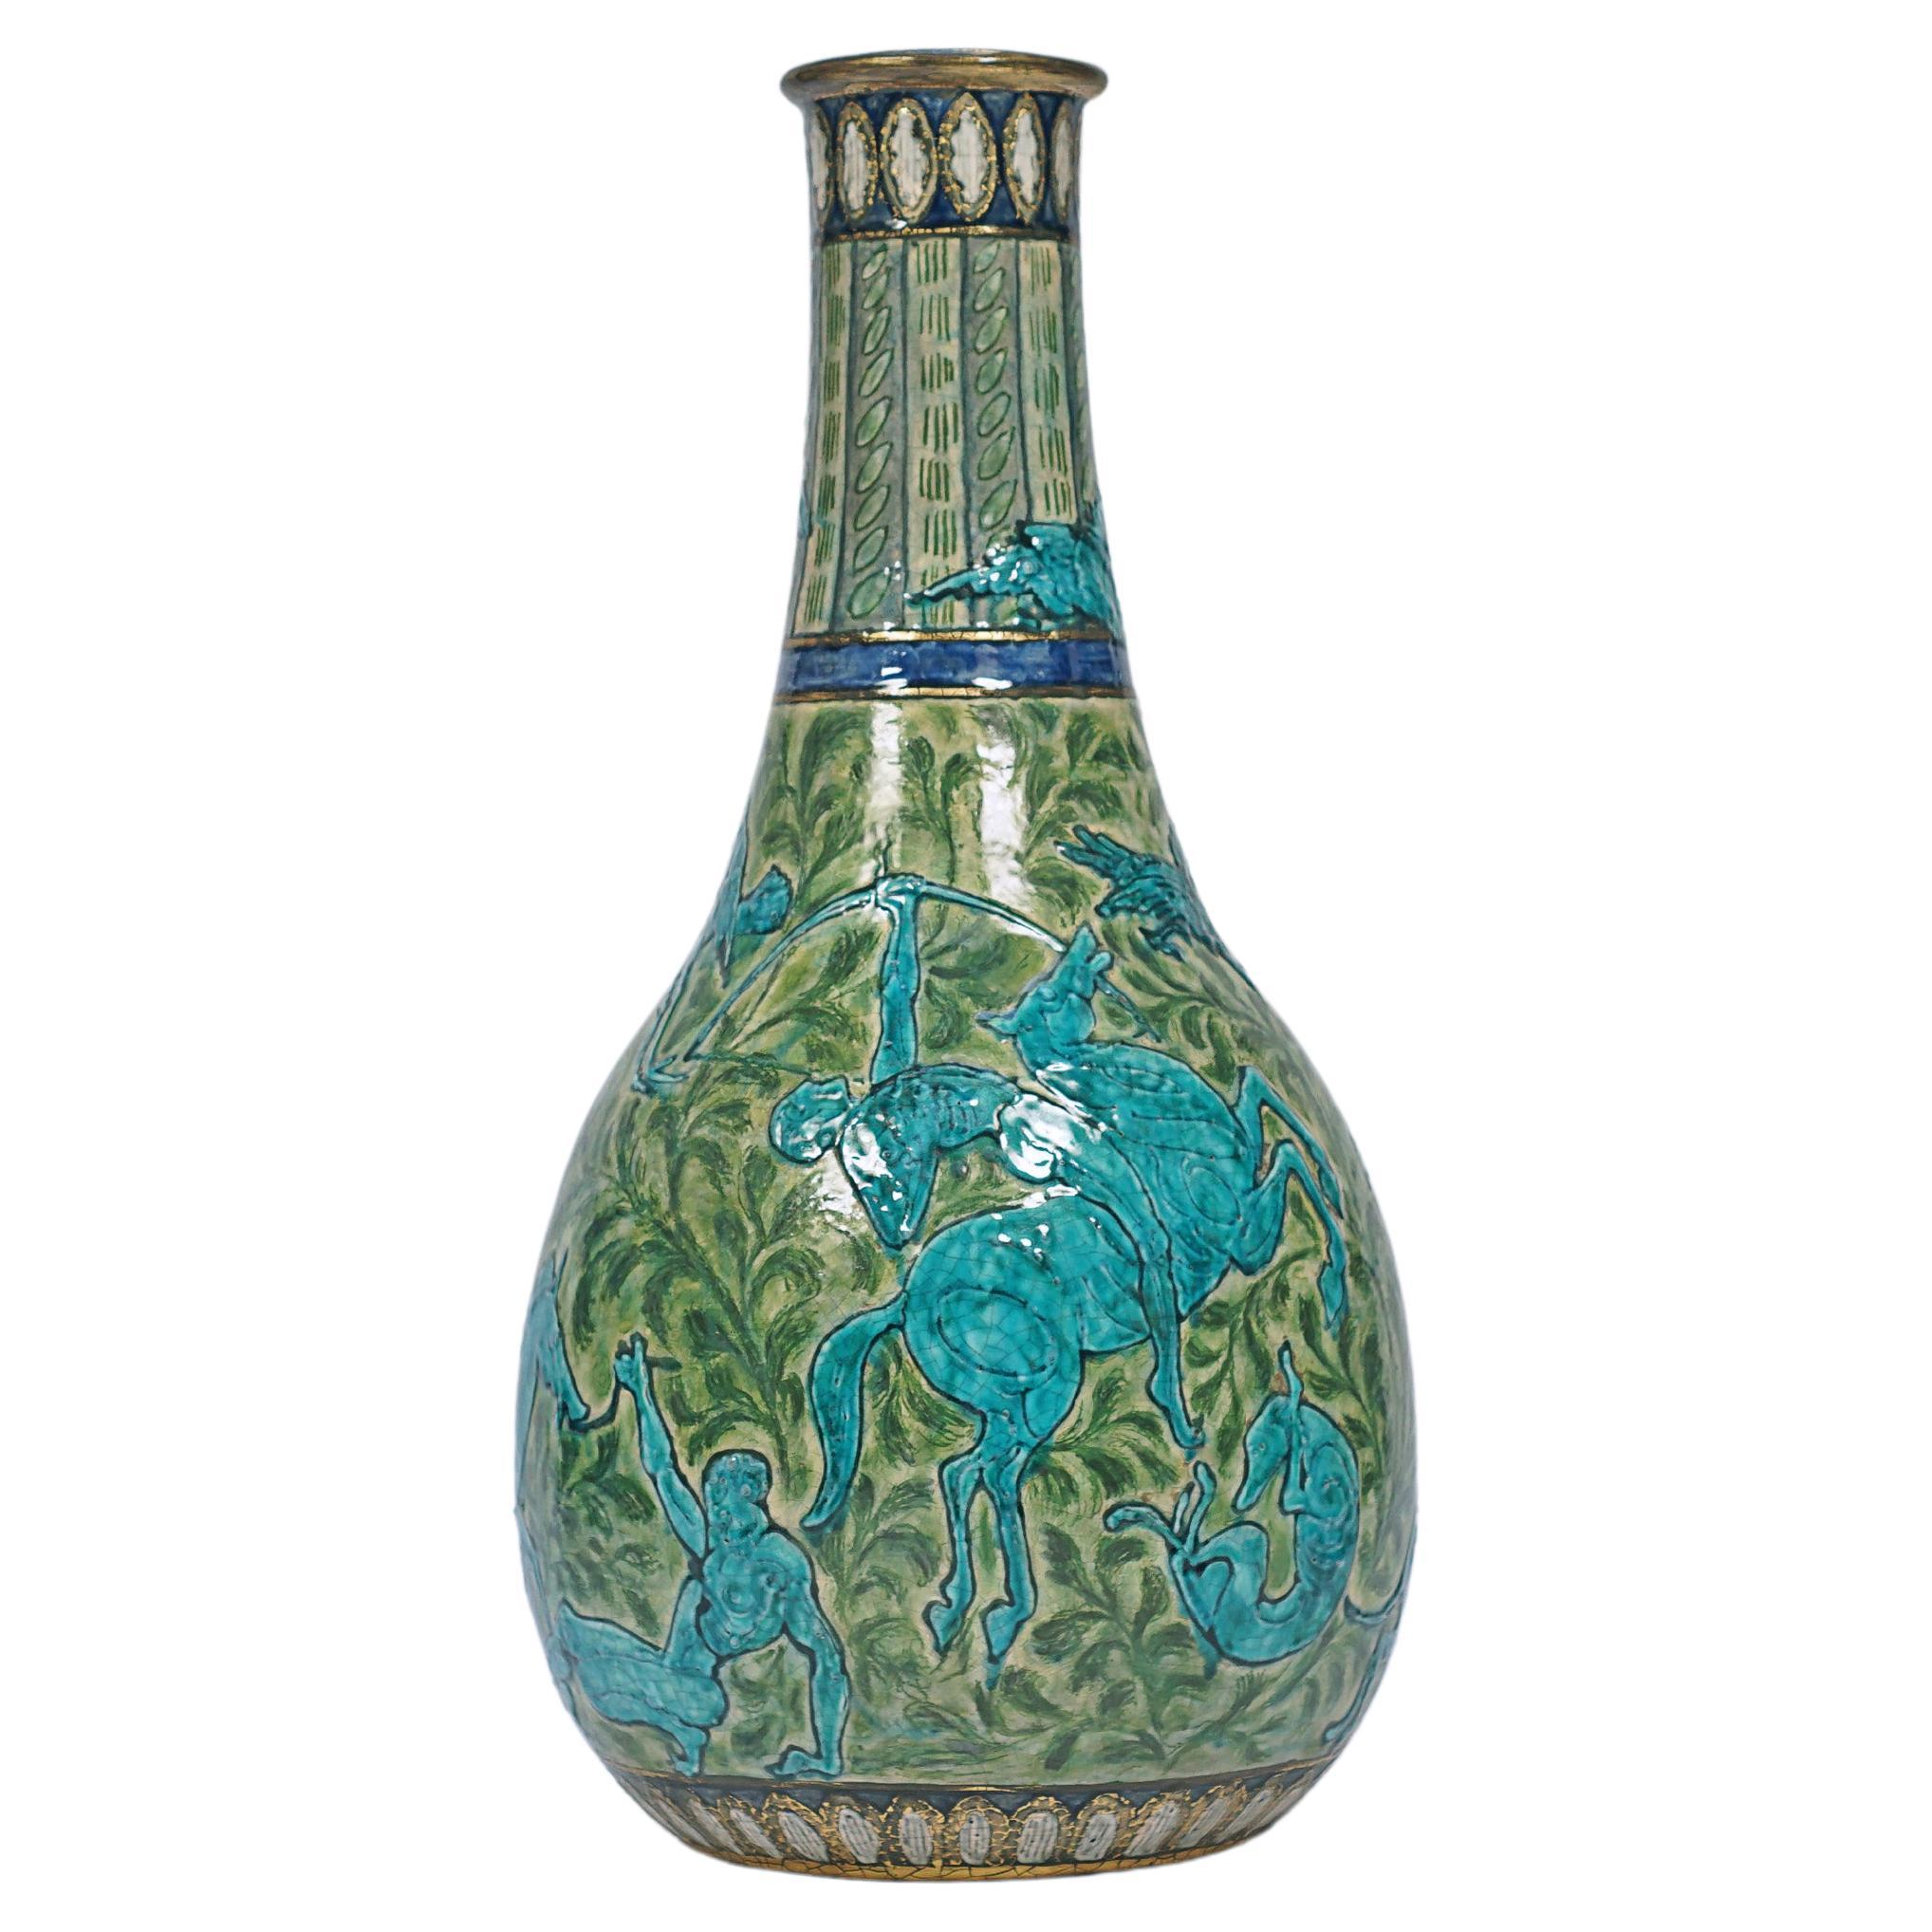 French stoneware ceramic vase, design by André Methey